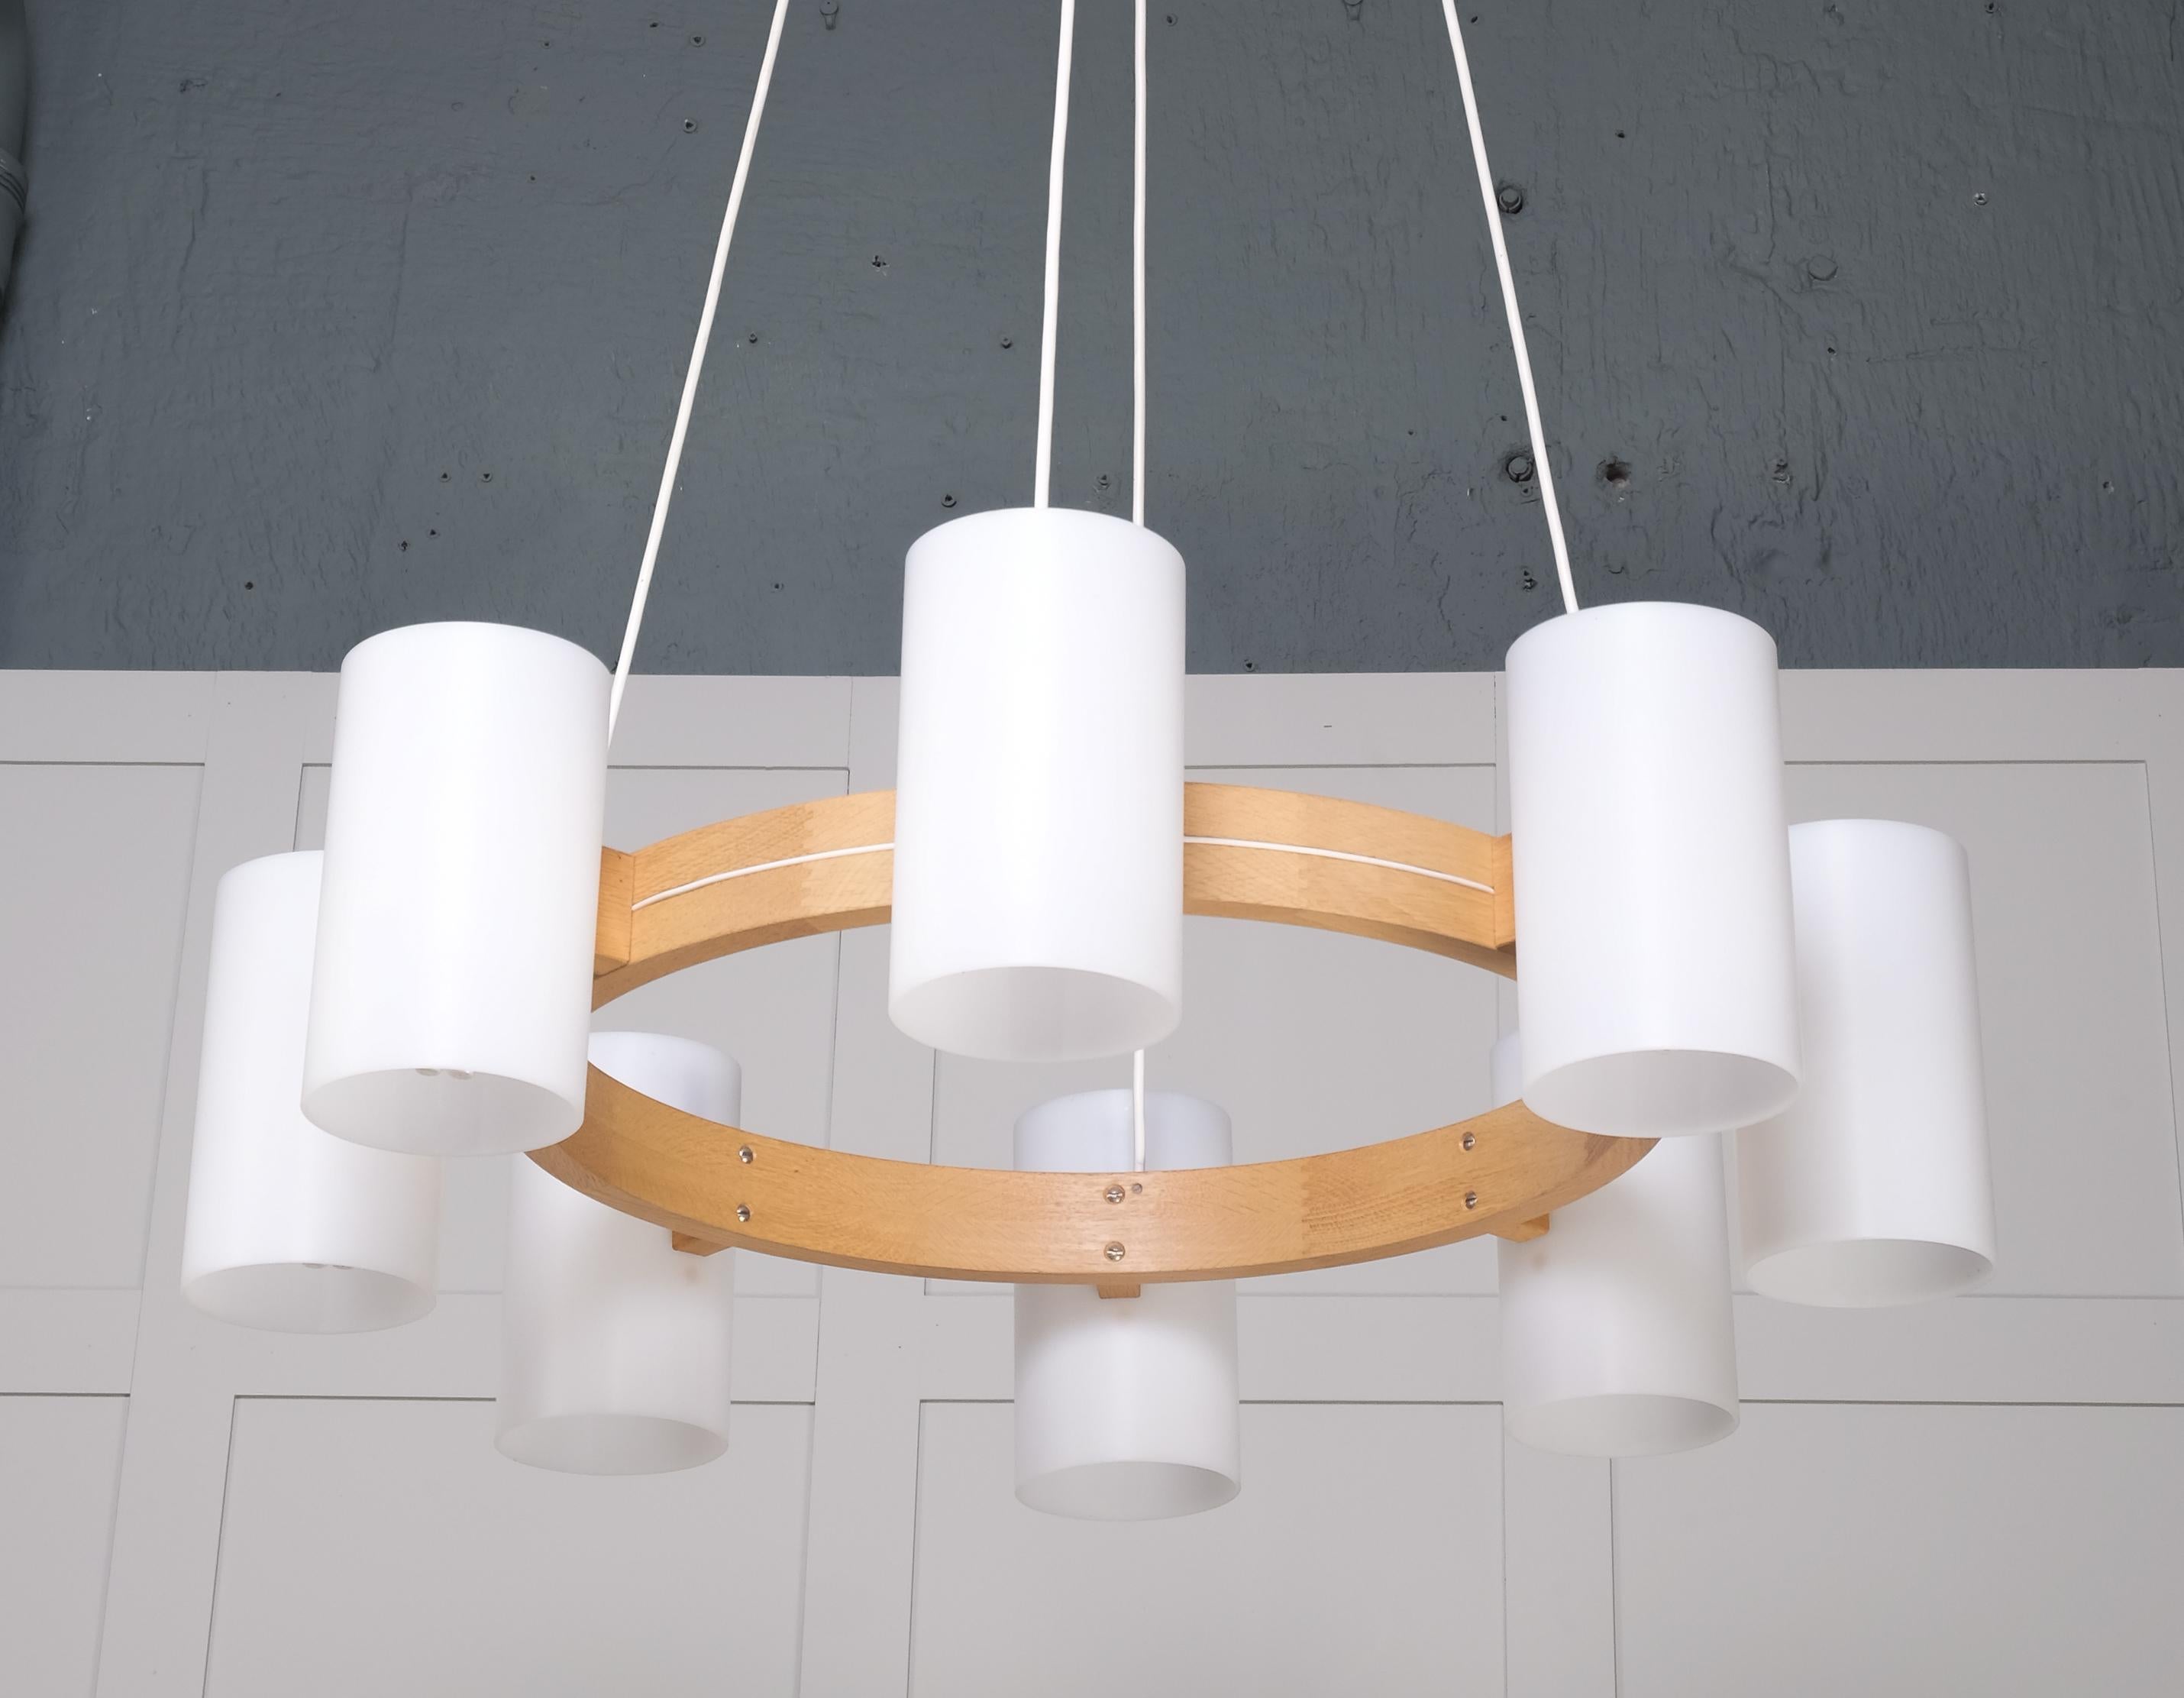 Set of 6 available. Listed price is for one chandelier. Model 587 designed by Uno & Östen Kristiansson, produced by Luxus. Oak and large acrylic shades.
Very good condition. The height is adjustable according to your wishes.